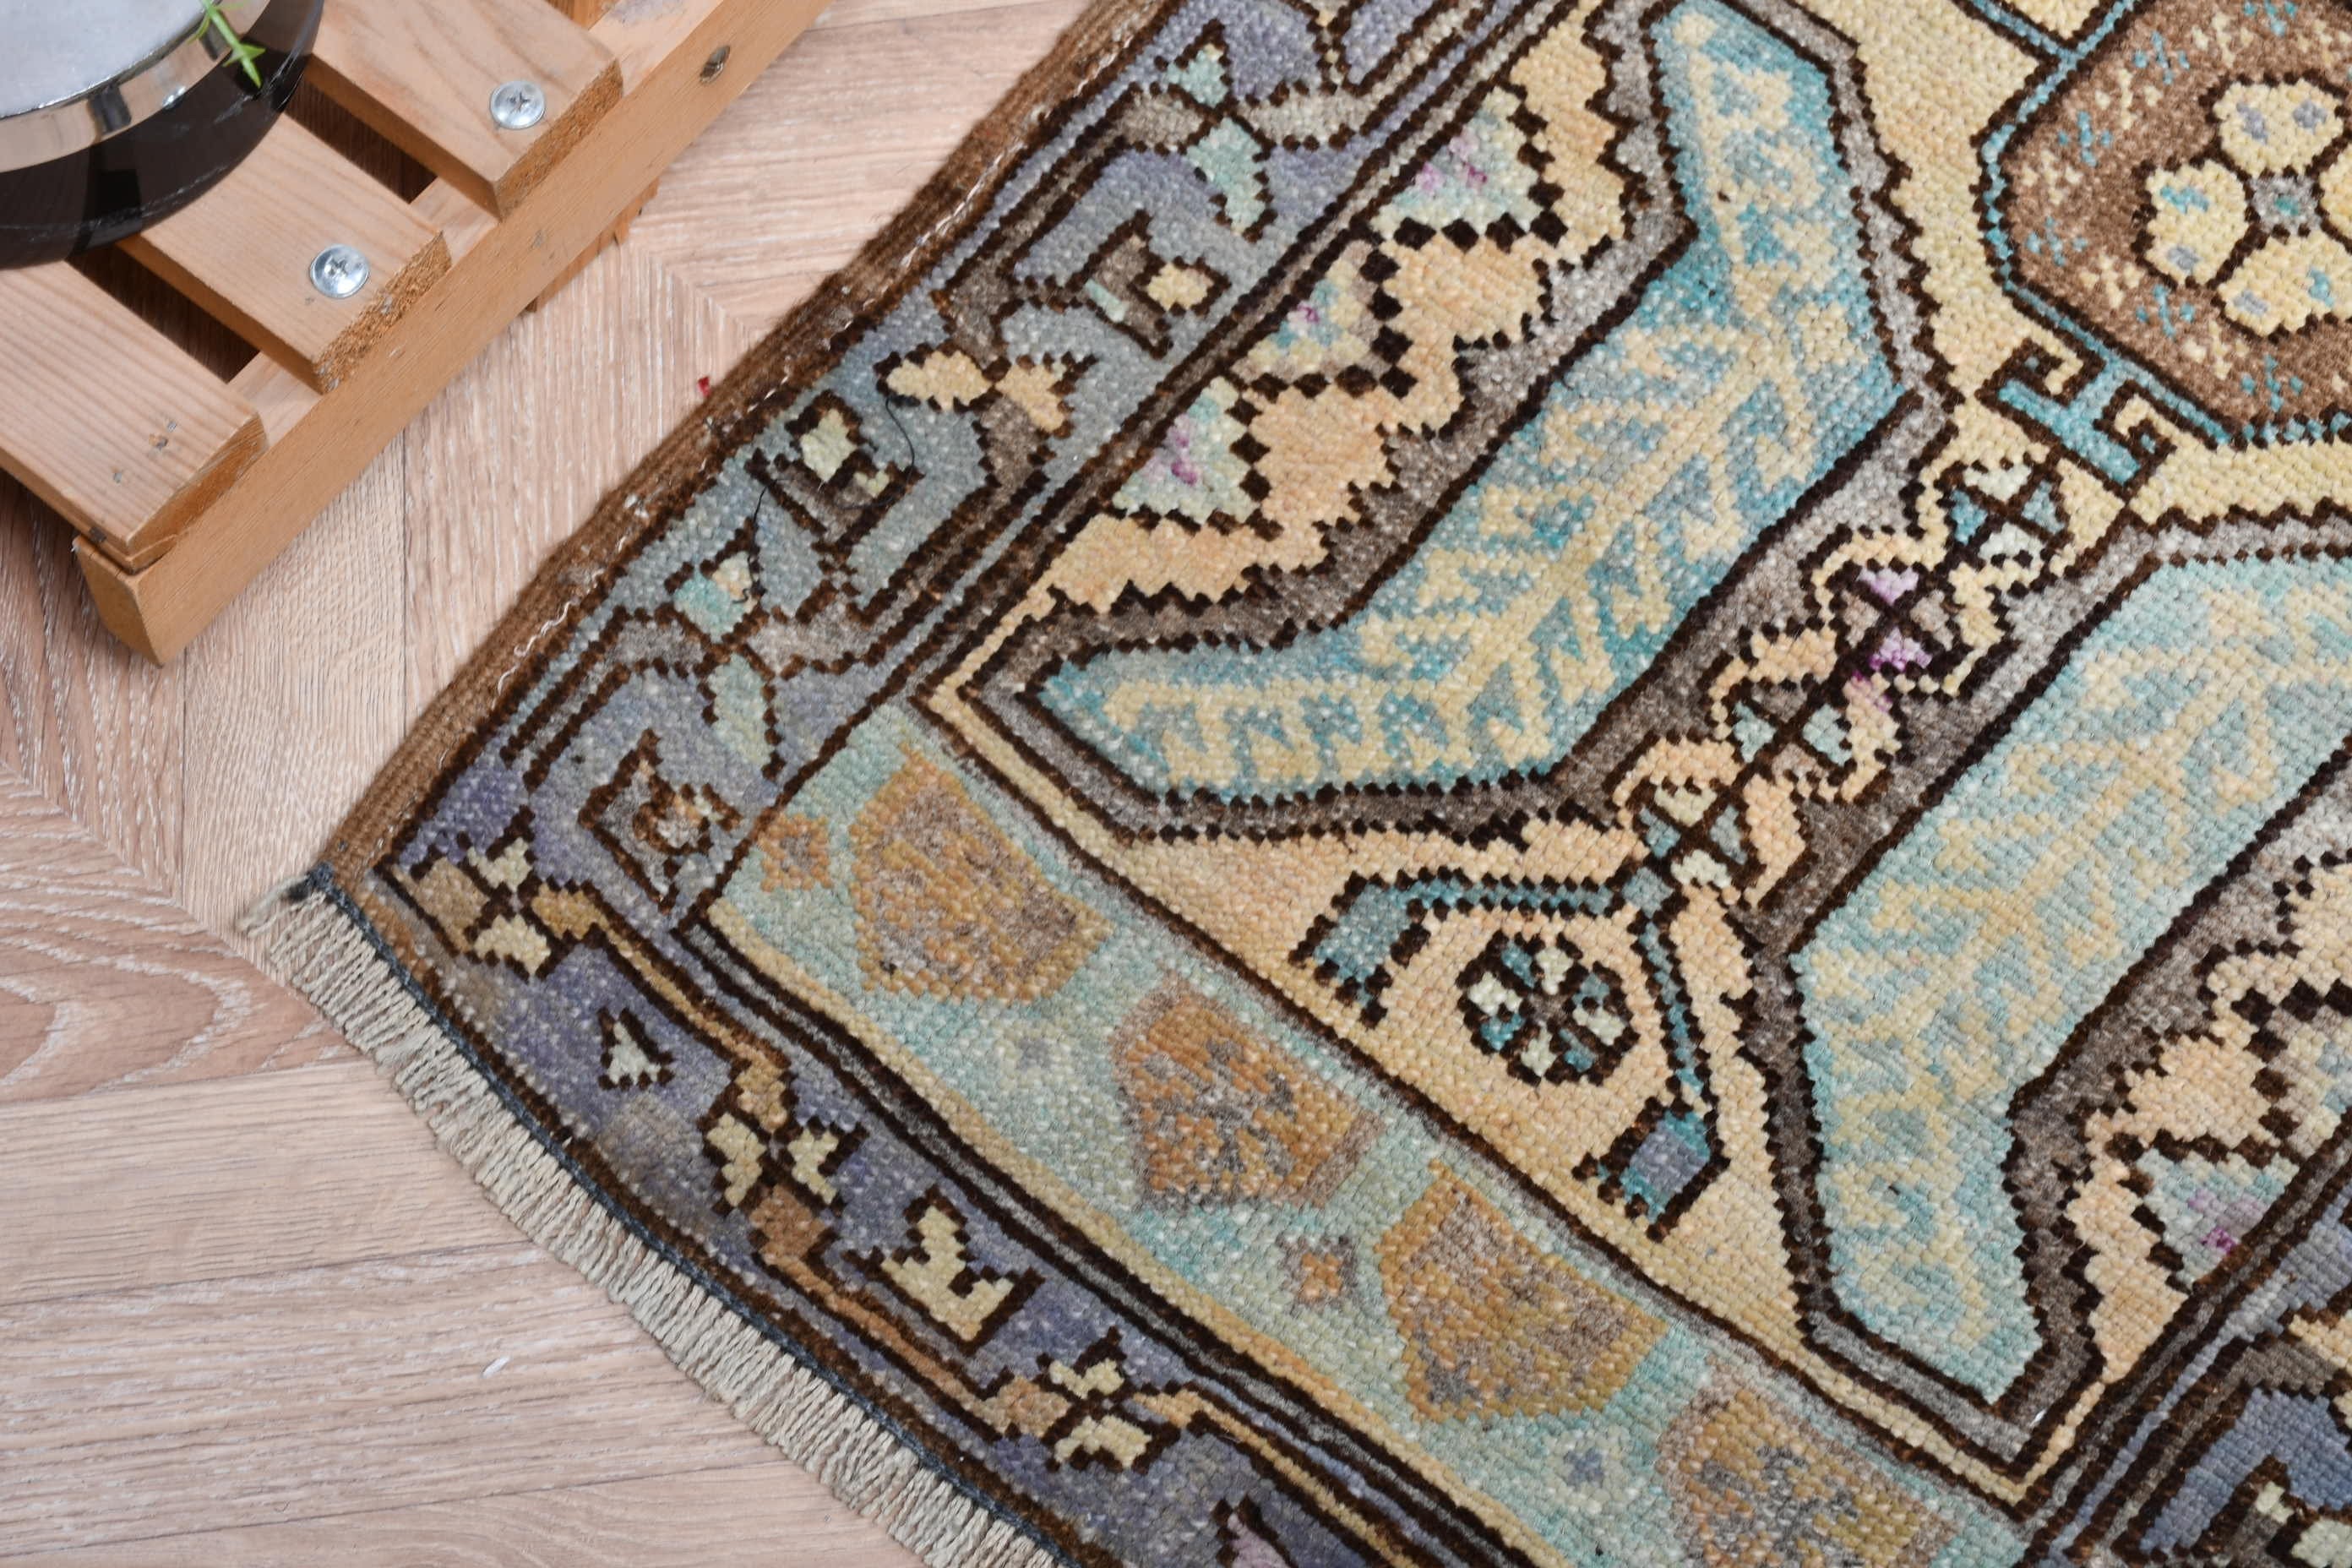 Oriental Rug, Pastel Rugs, Rugs for Kitchen, Bathroom Rug, Bedroom Rug, Blue Oriental Rug, Vintage Rugs, Turkish Rugs, 1.6x2.9 ft Small Rug